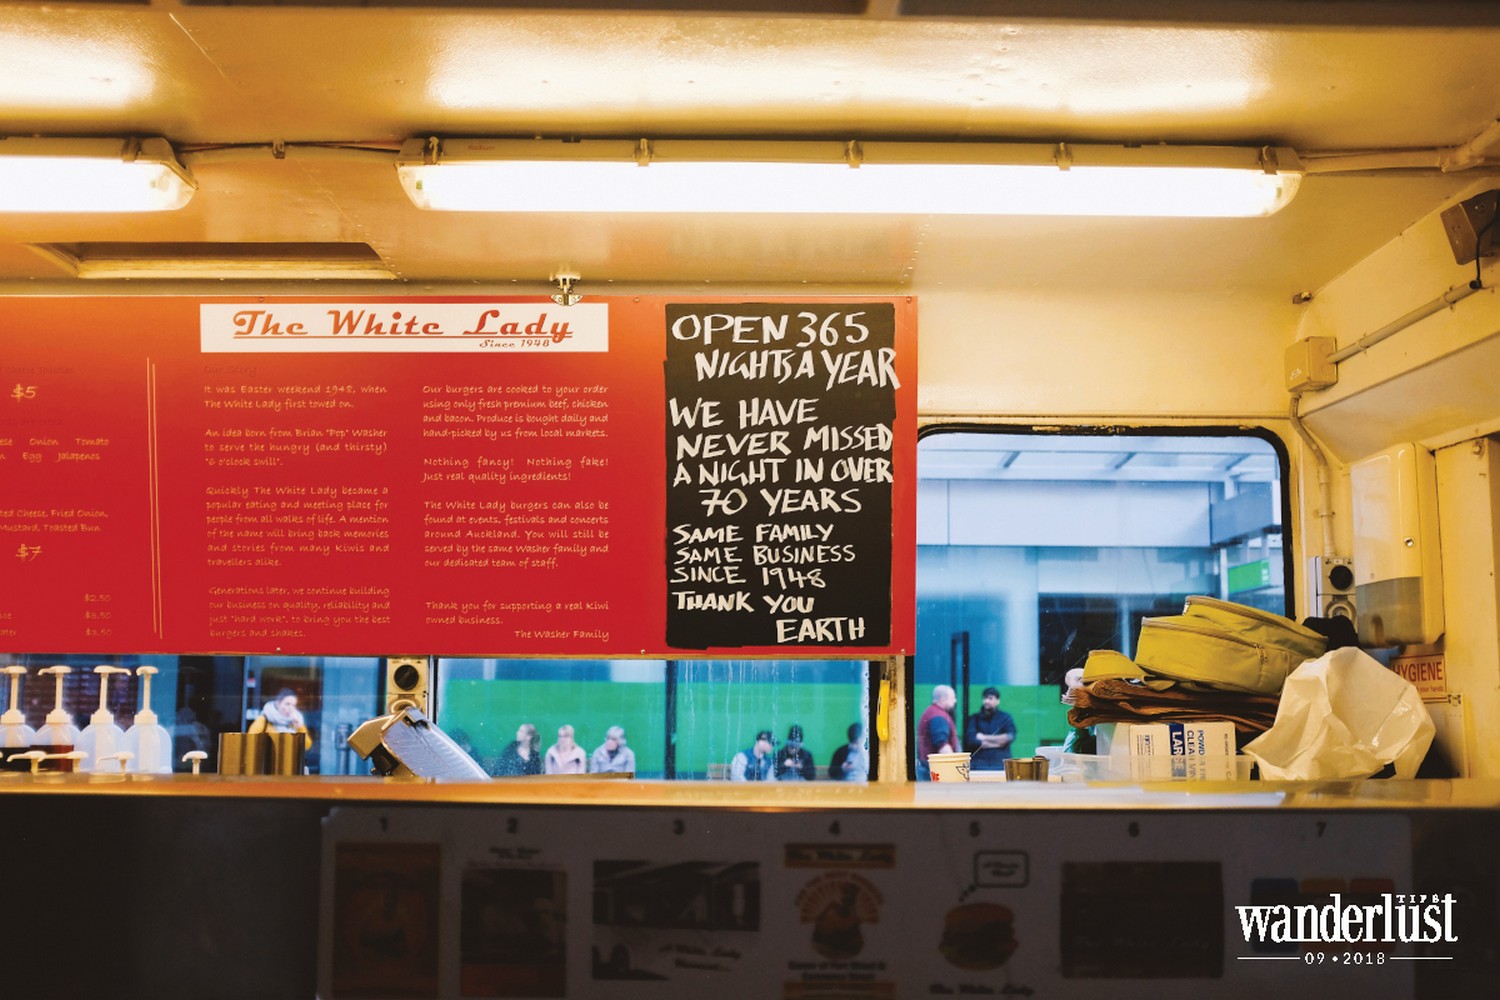 Wanderlust Tips | The White Lady, 70 years of street food history in the land of the kiwi